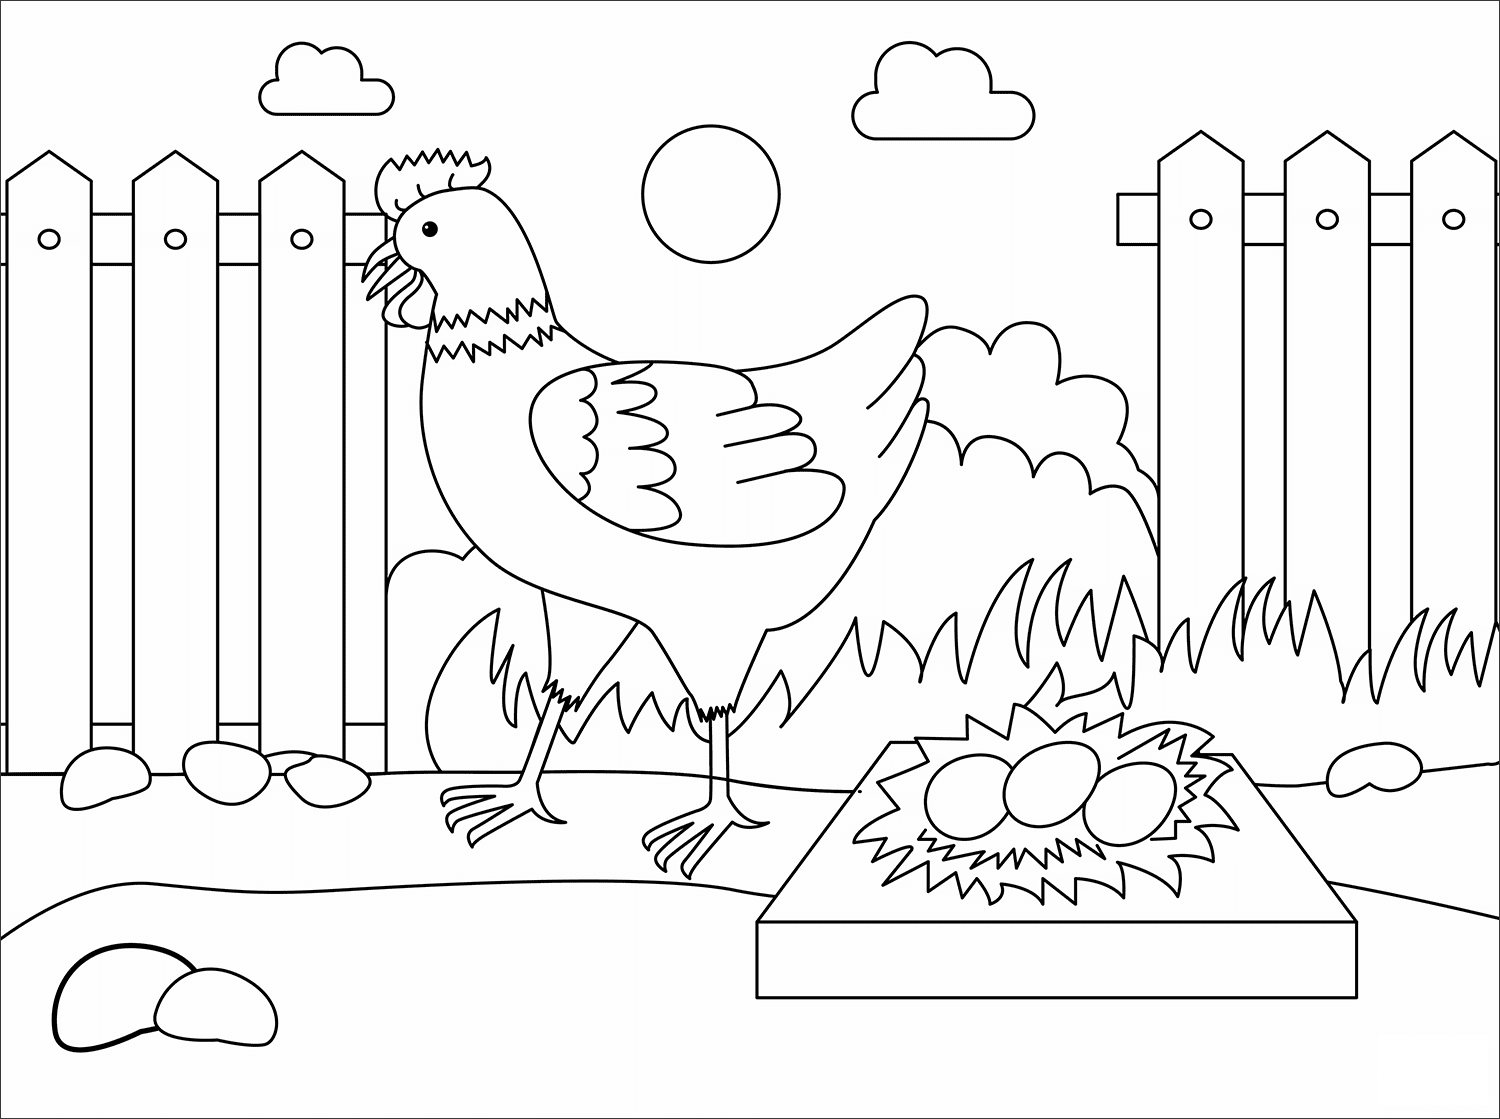 Chicken Animal Simple Coloring Page